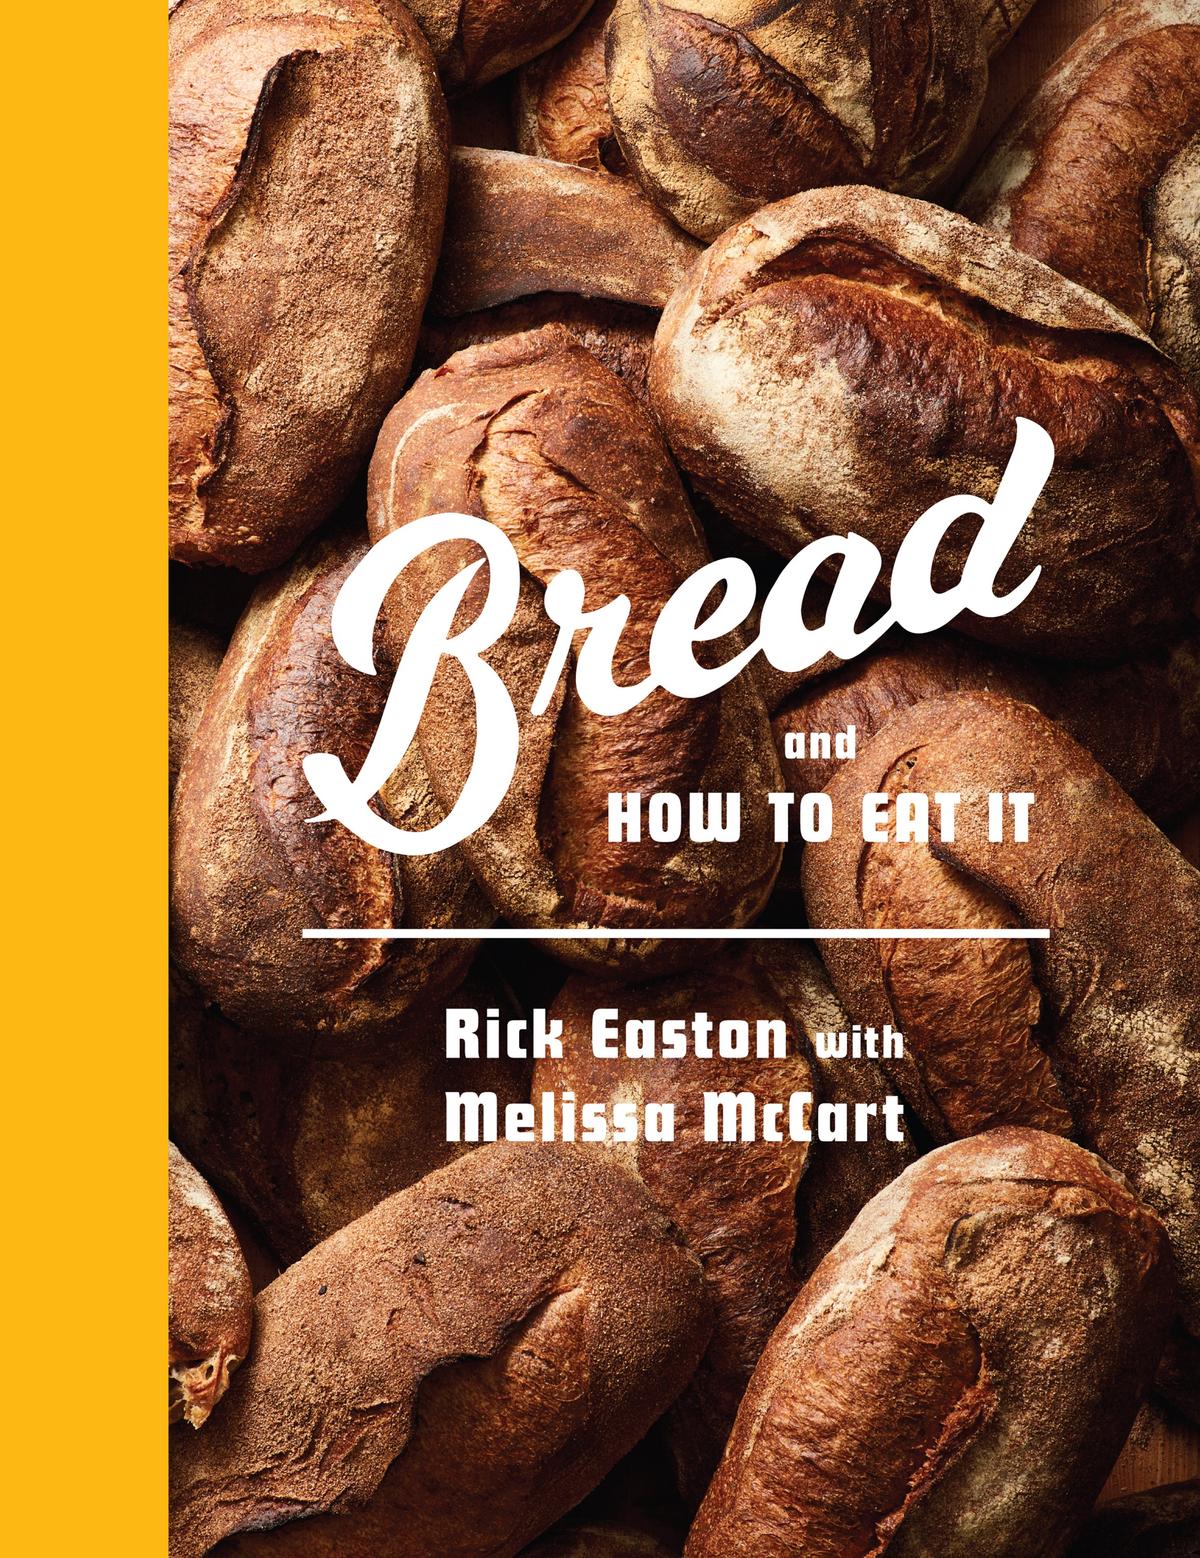 "Bread and How to Eat It" by former PG restaurant critic Melissa McCart and Rick Easton of Bread and Salt. (Penguin Random House/TNS)